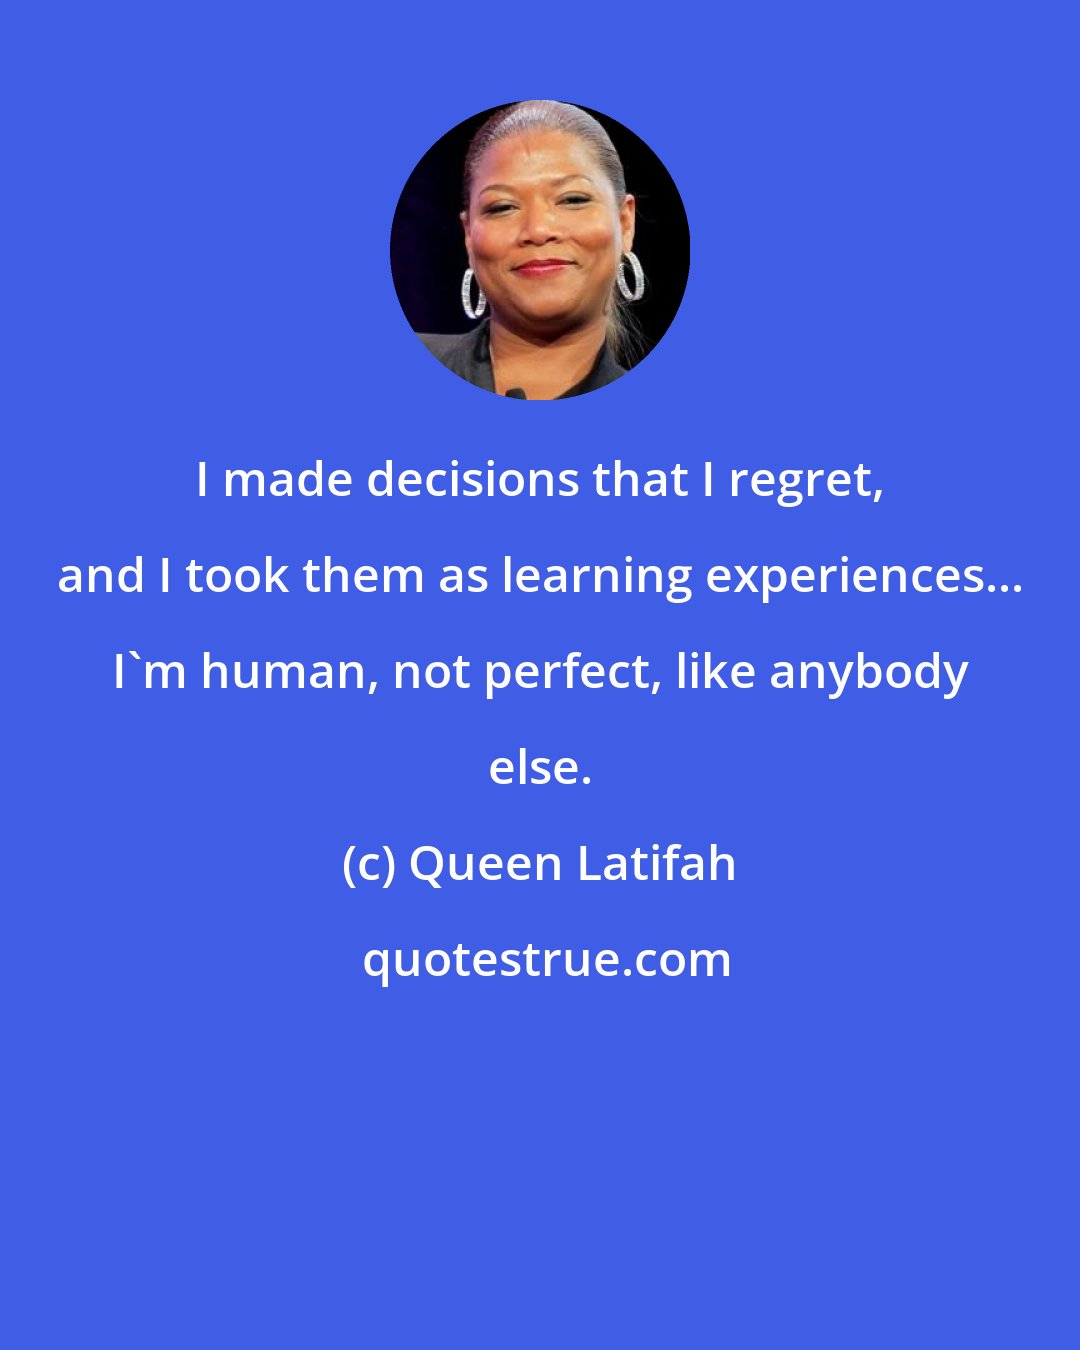 Queen Latifah: I made decisions that I regret, and I took them as learning experiences... I'm human, not perfect, like anybody else.